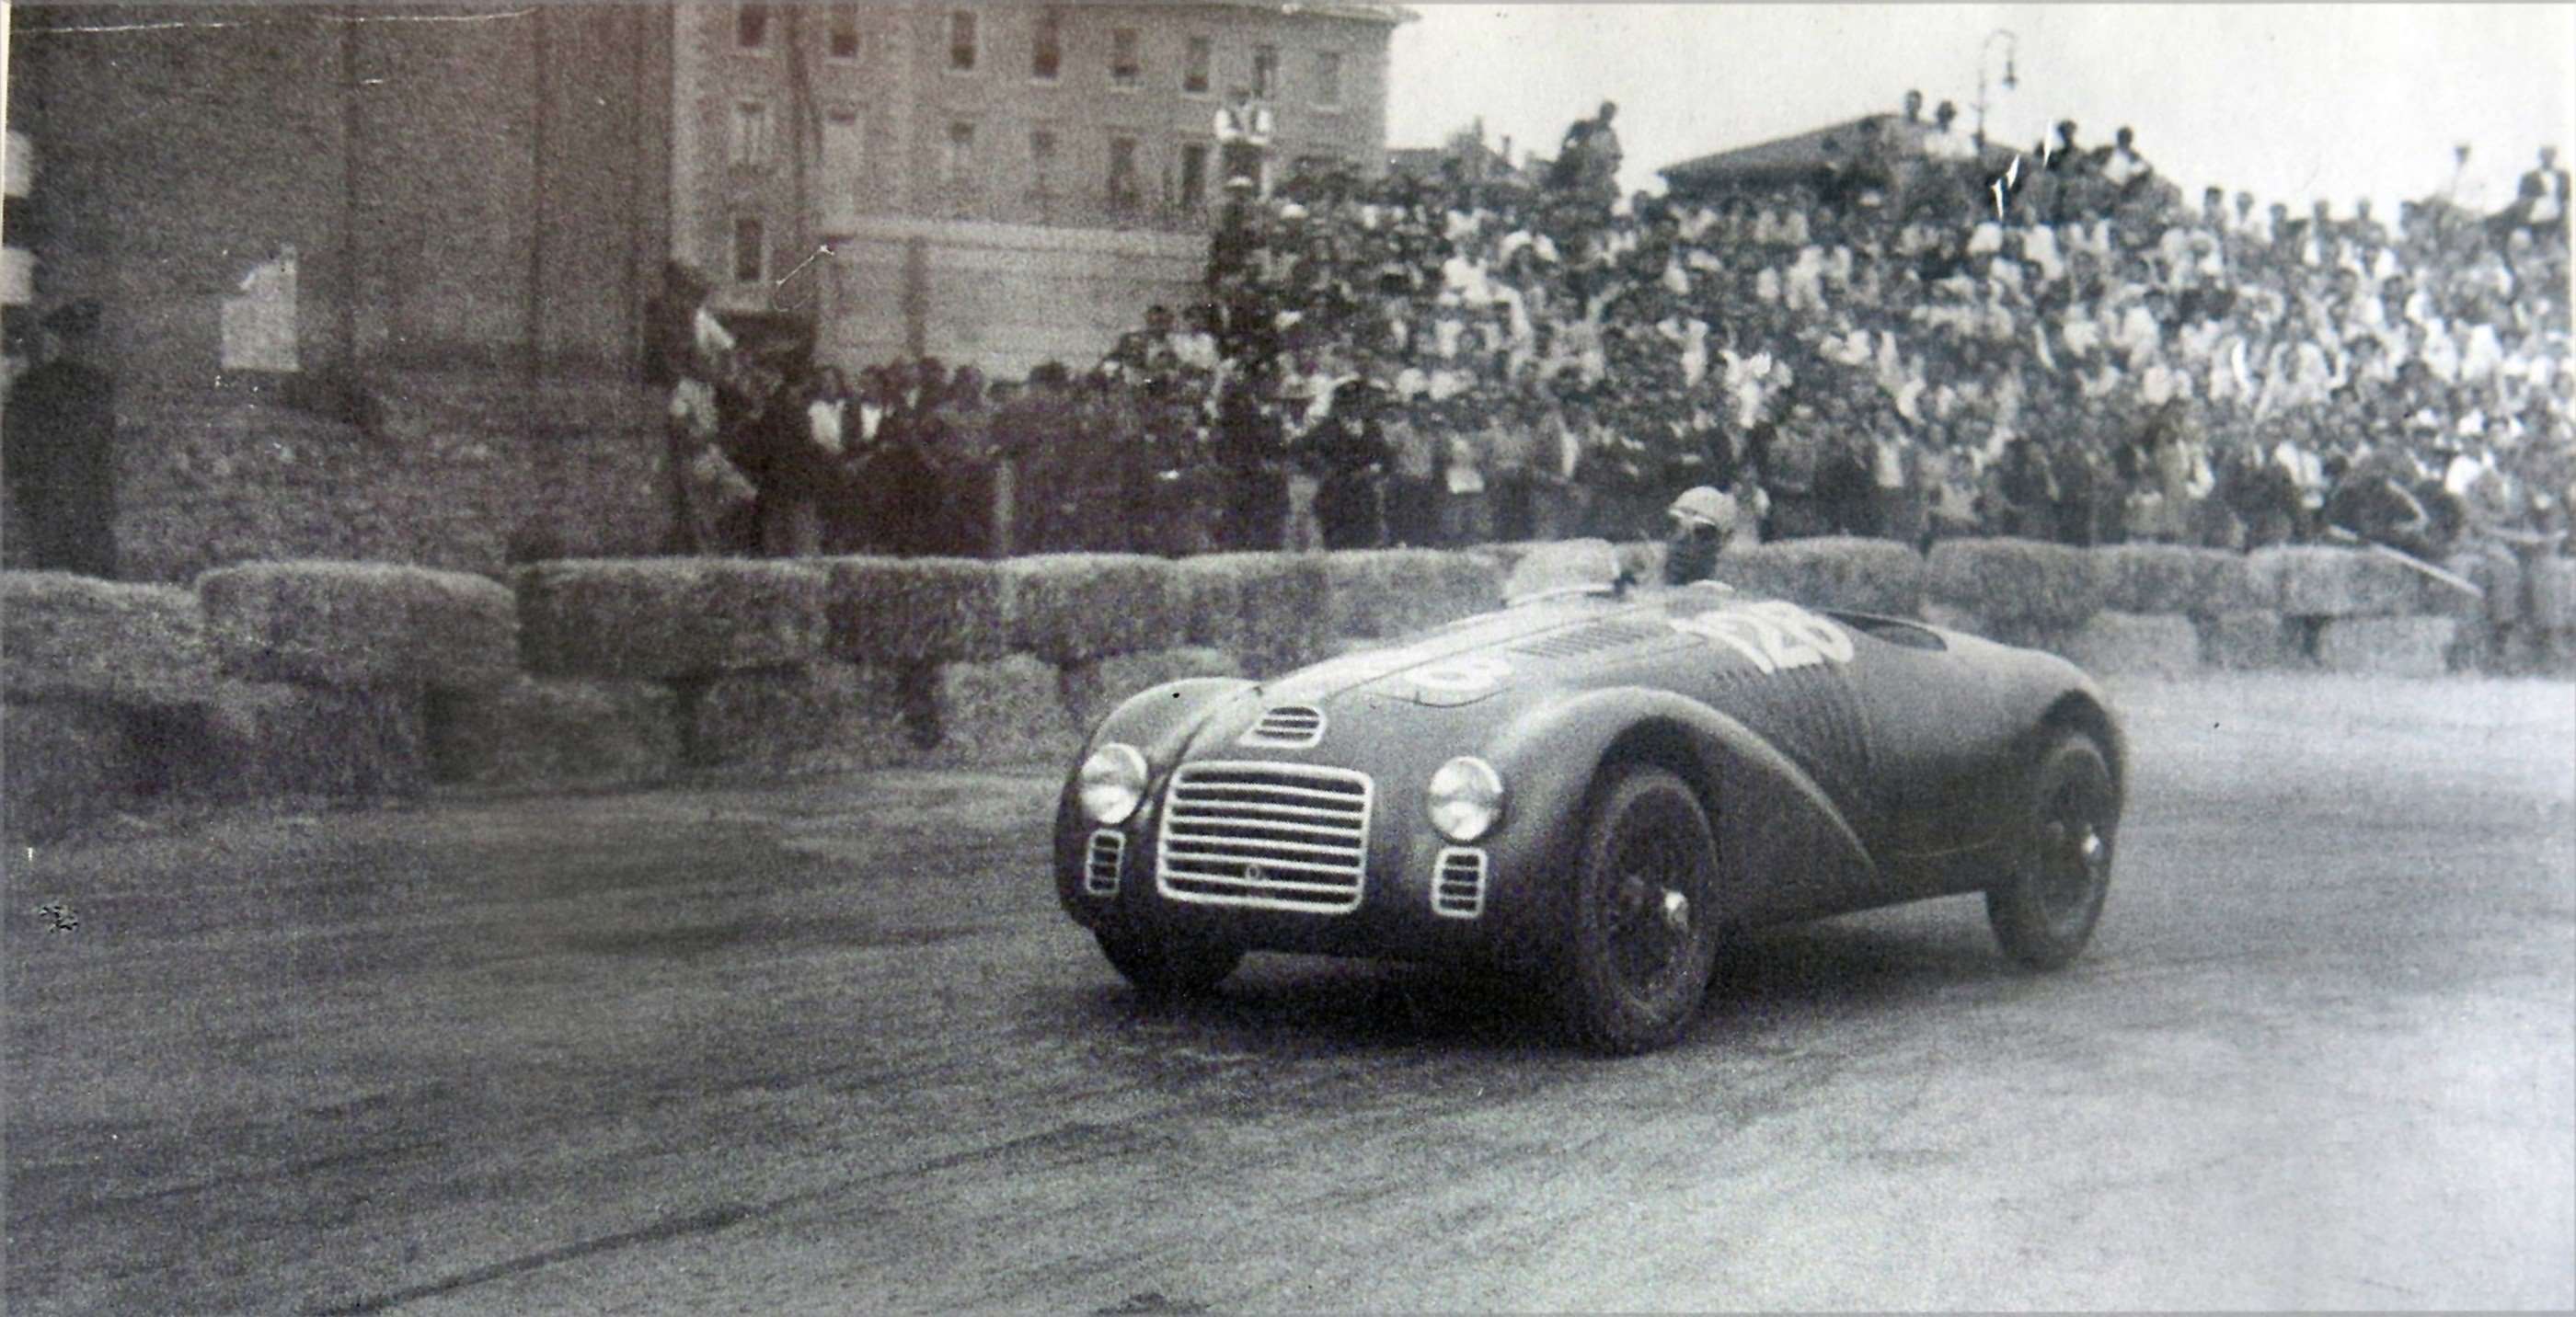 May 11th, 1947 - Piacenza, Italy - Franco Cortese in the first prototype Ferrari 125 V12 sports-racing car led at one point before retirement when the fuel pump failed.